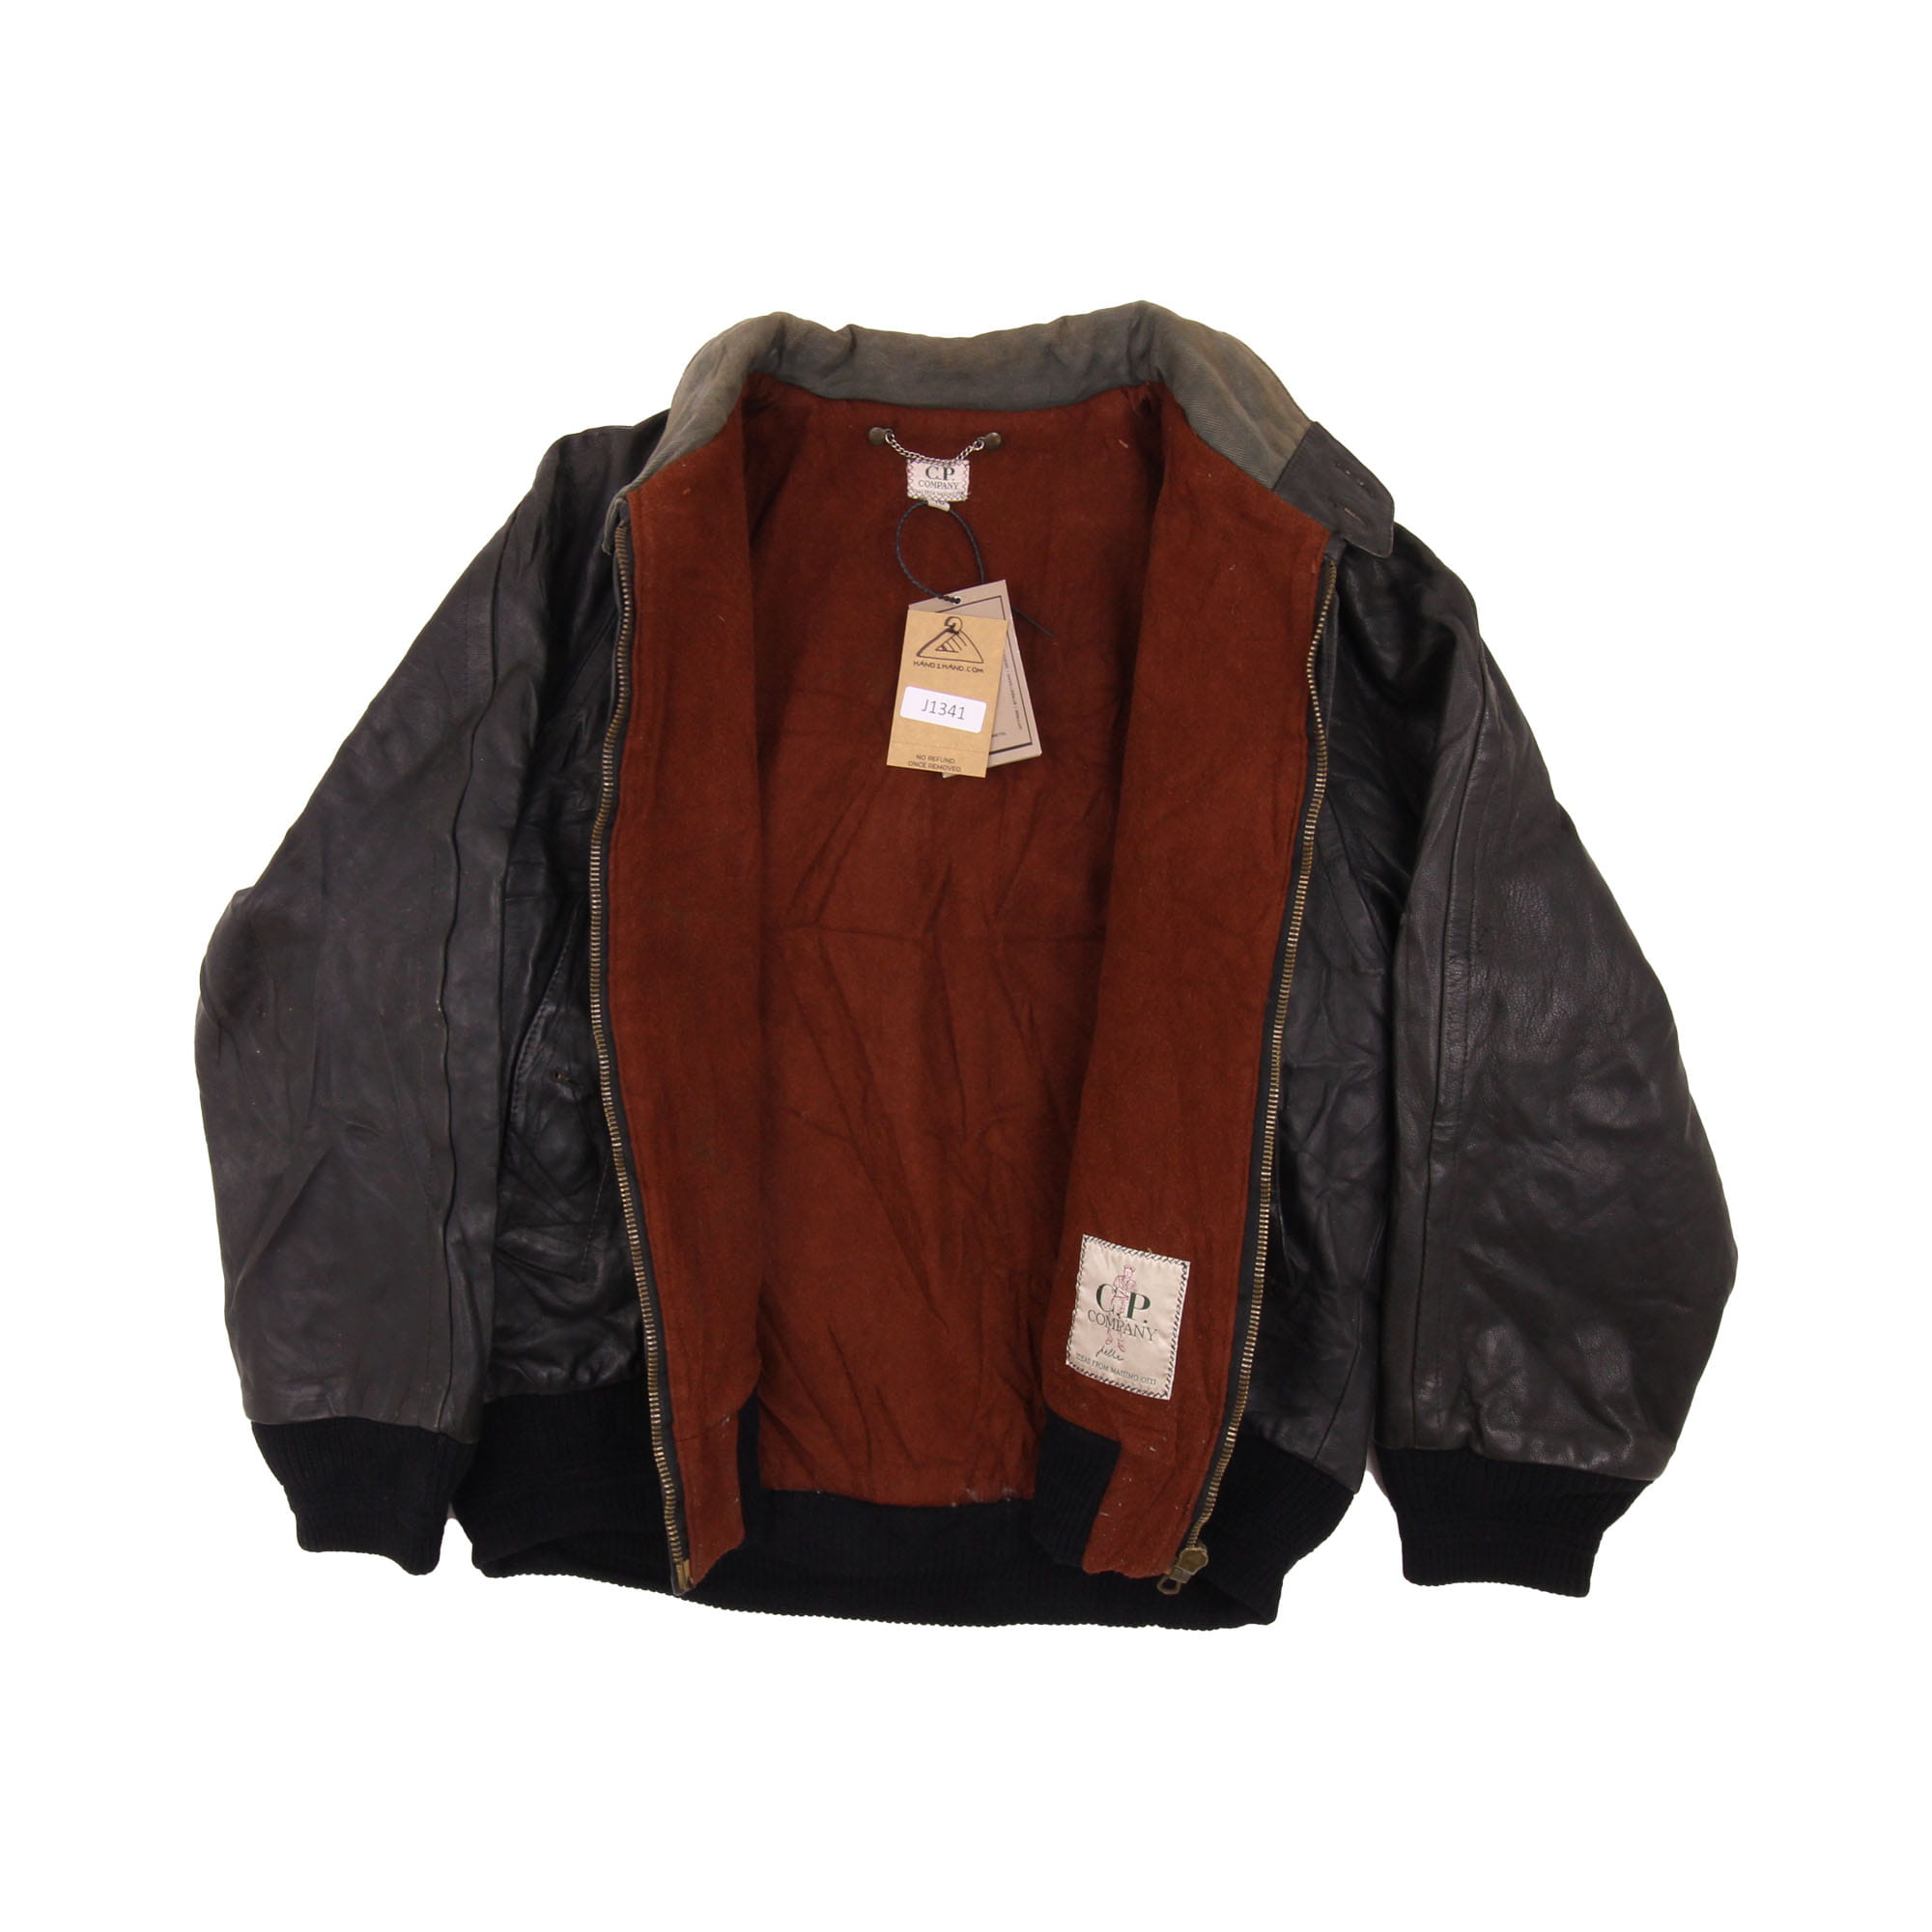 CP Company Leather Jacket- M 